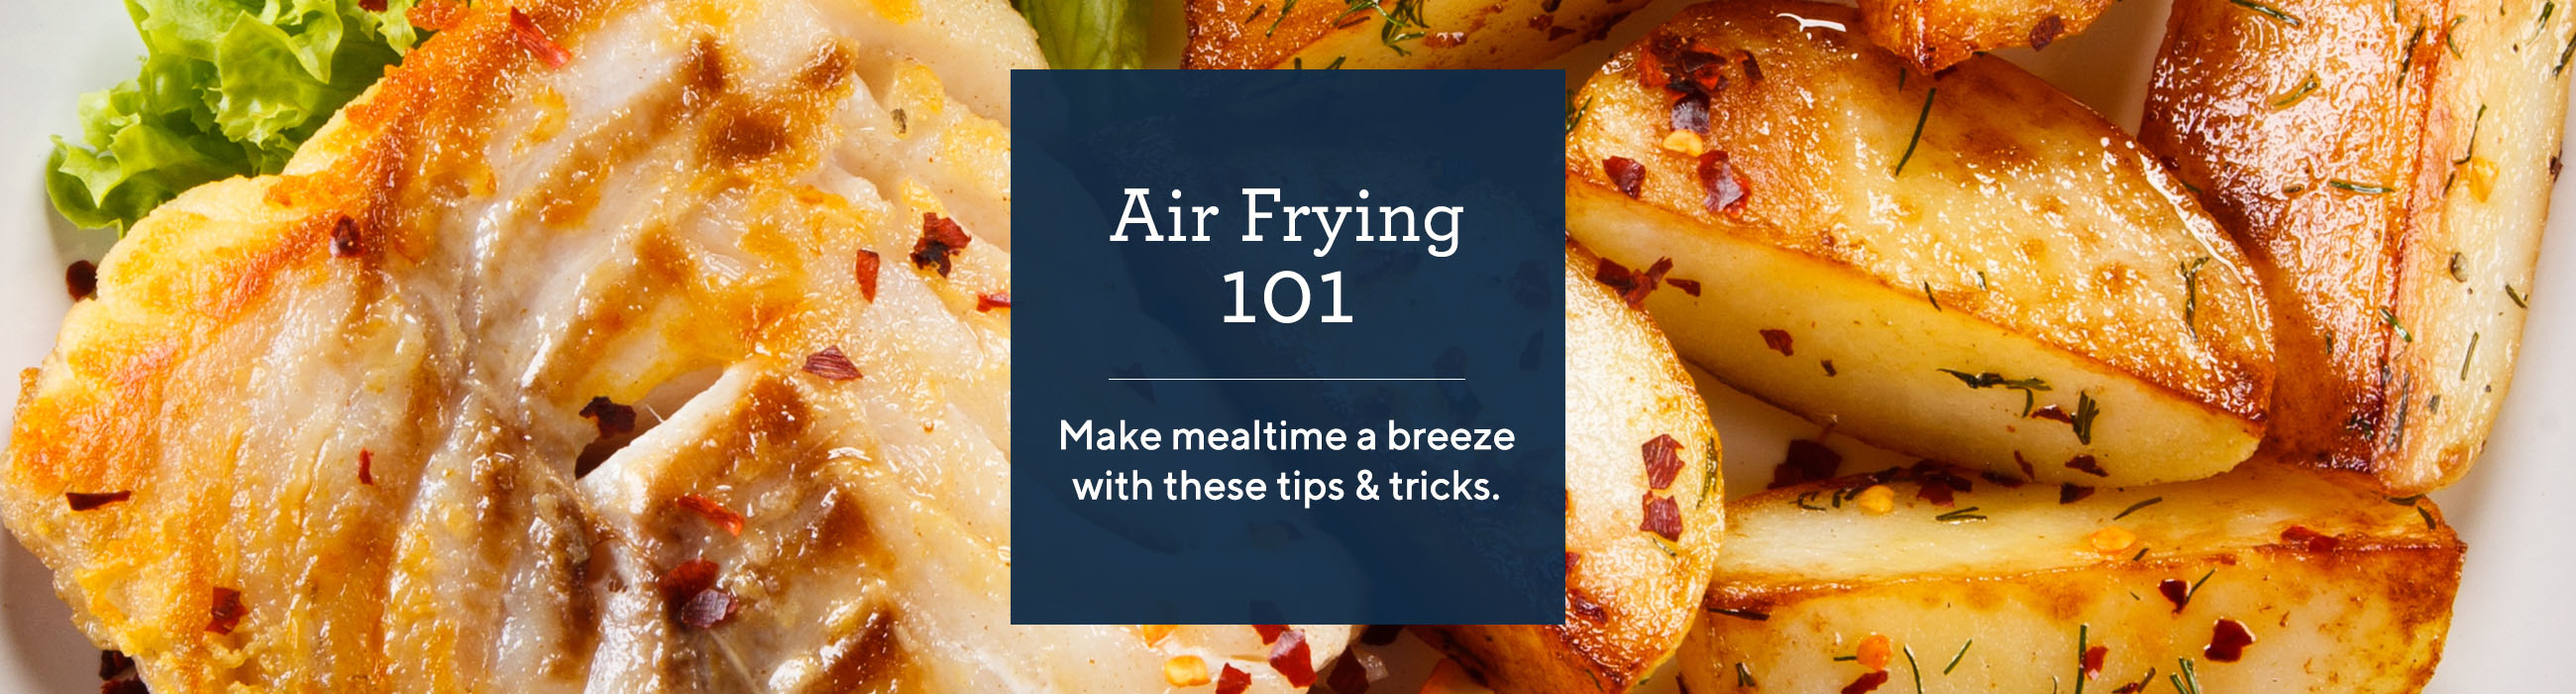 Air Frying 101.  Make mealtime a breeze with these tips & tricks.